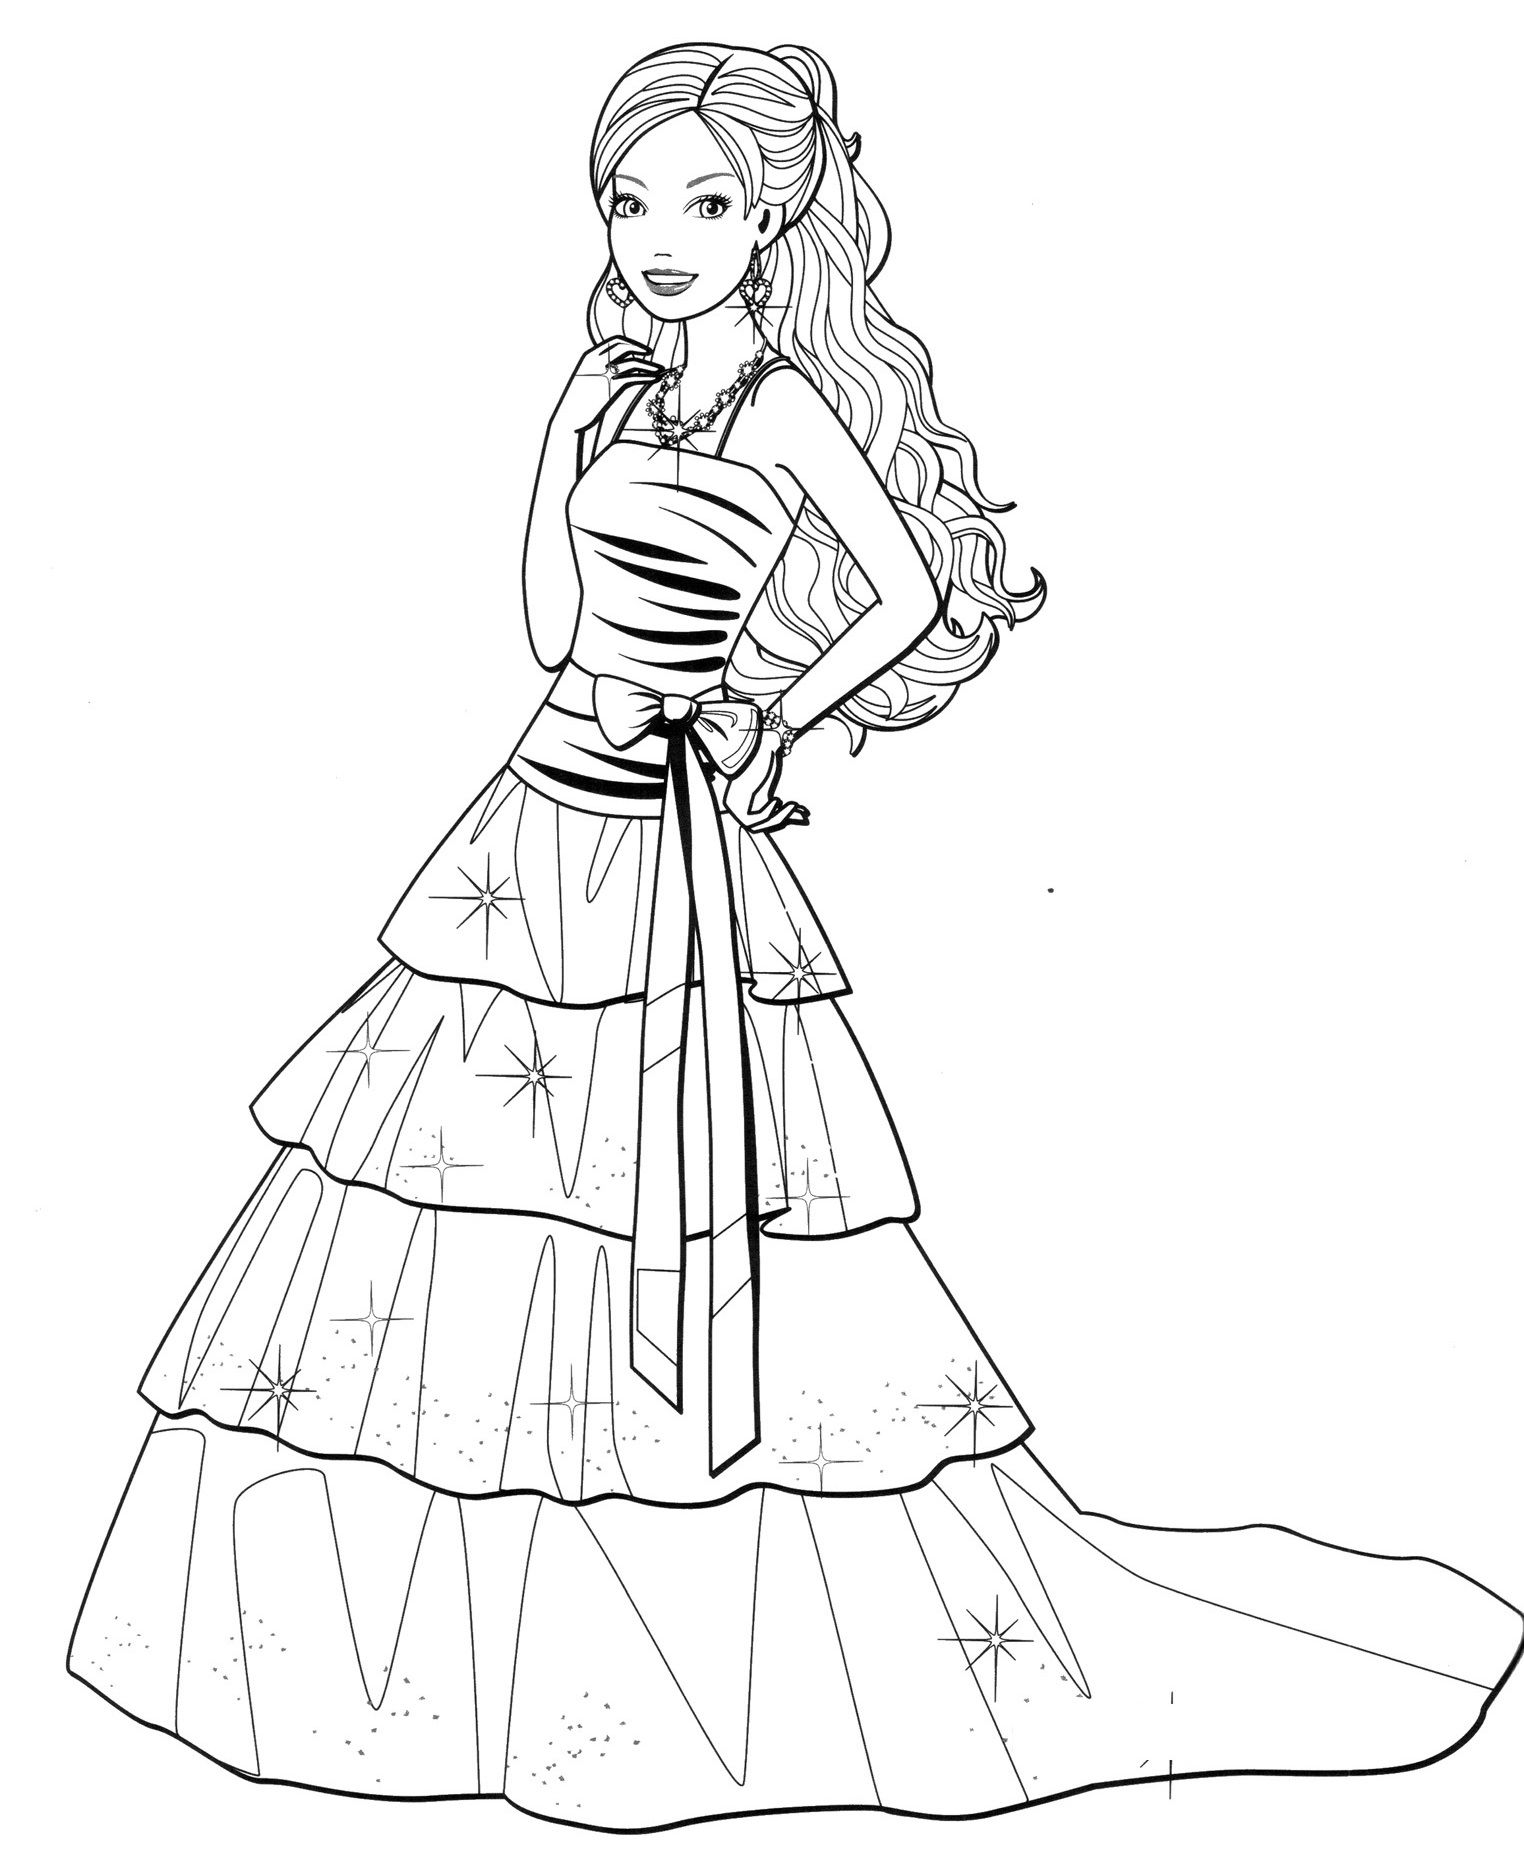 Fashion Dress Coloring Pages at Free printable